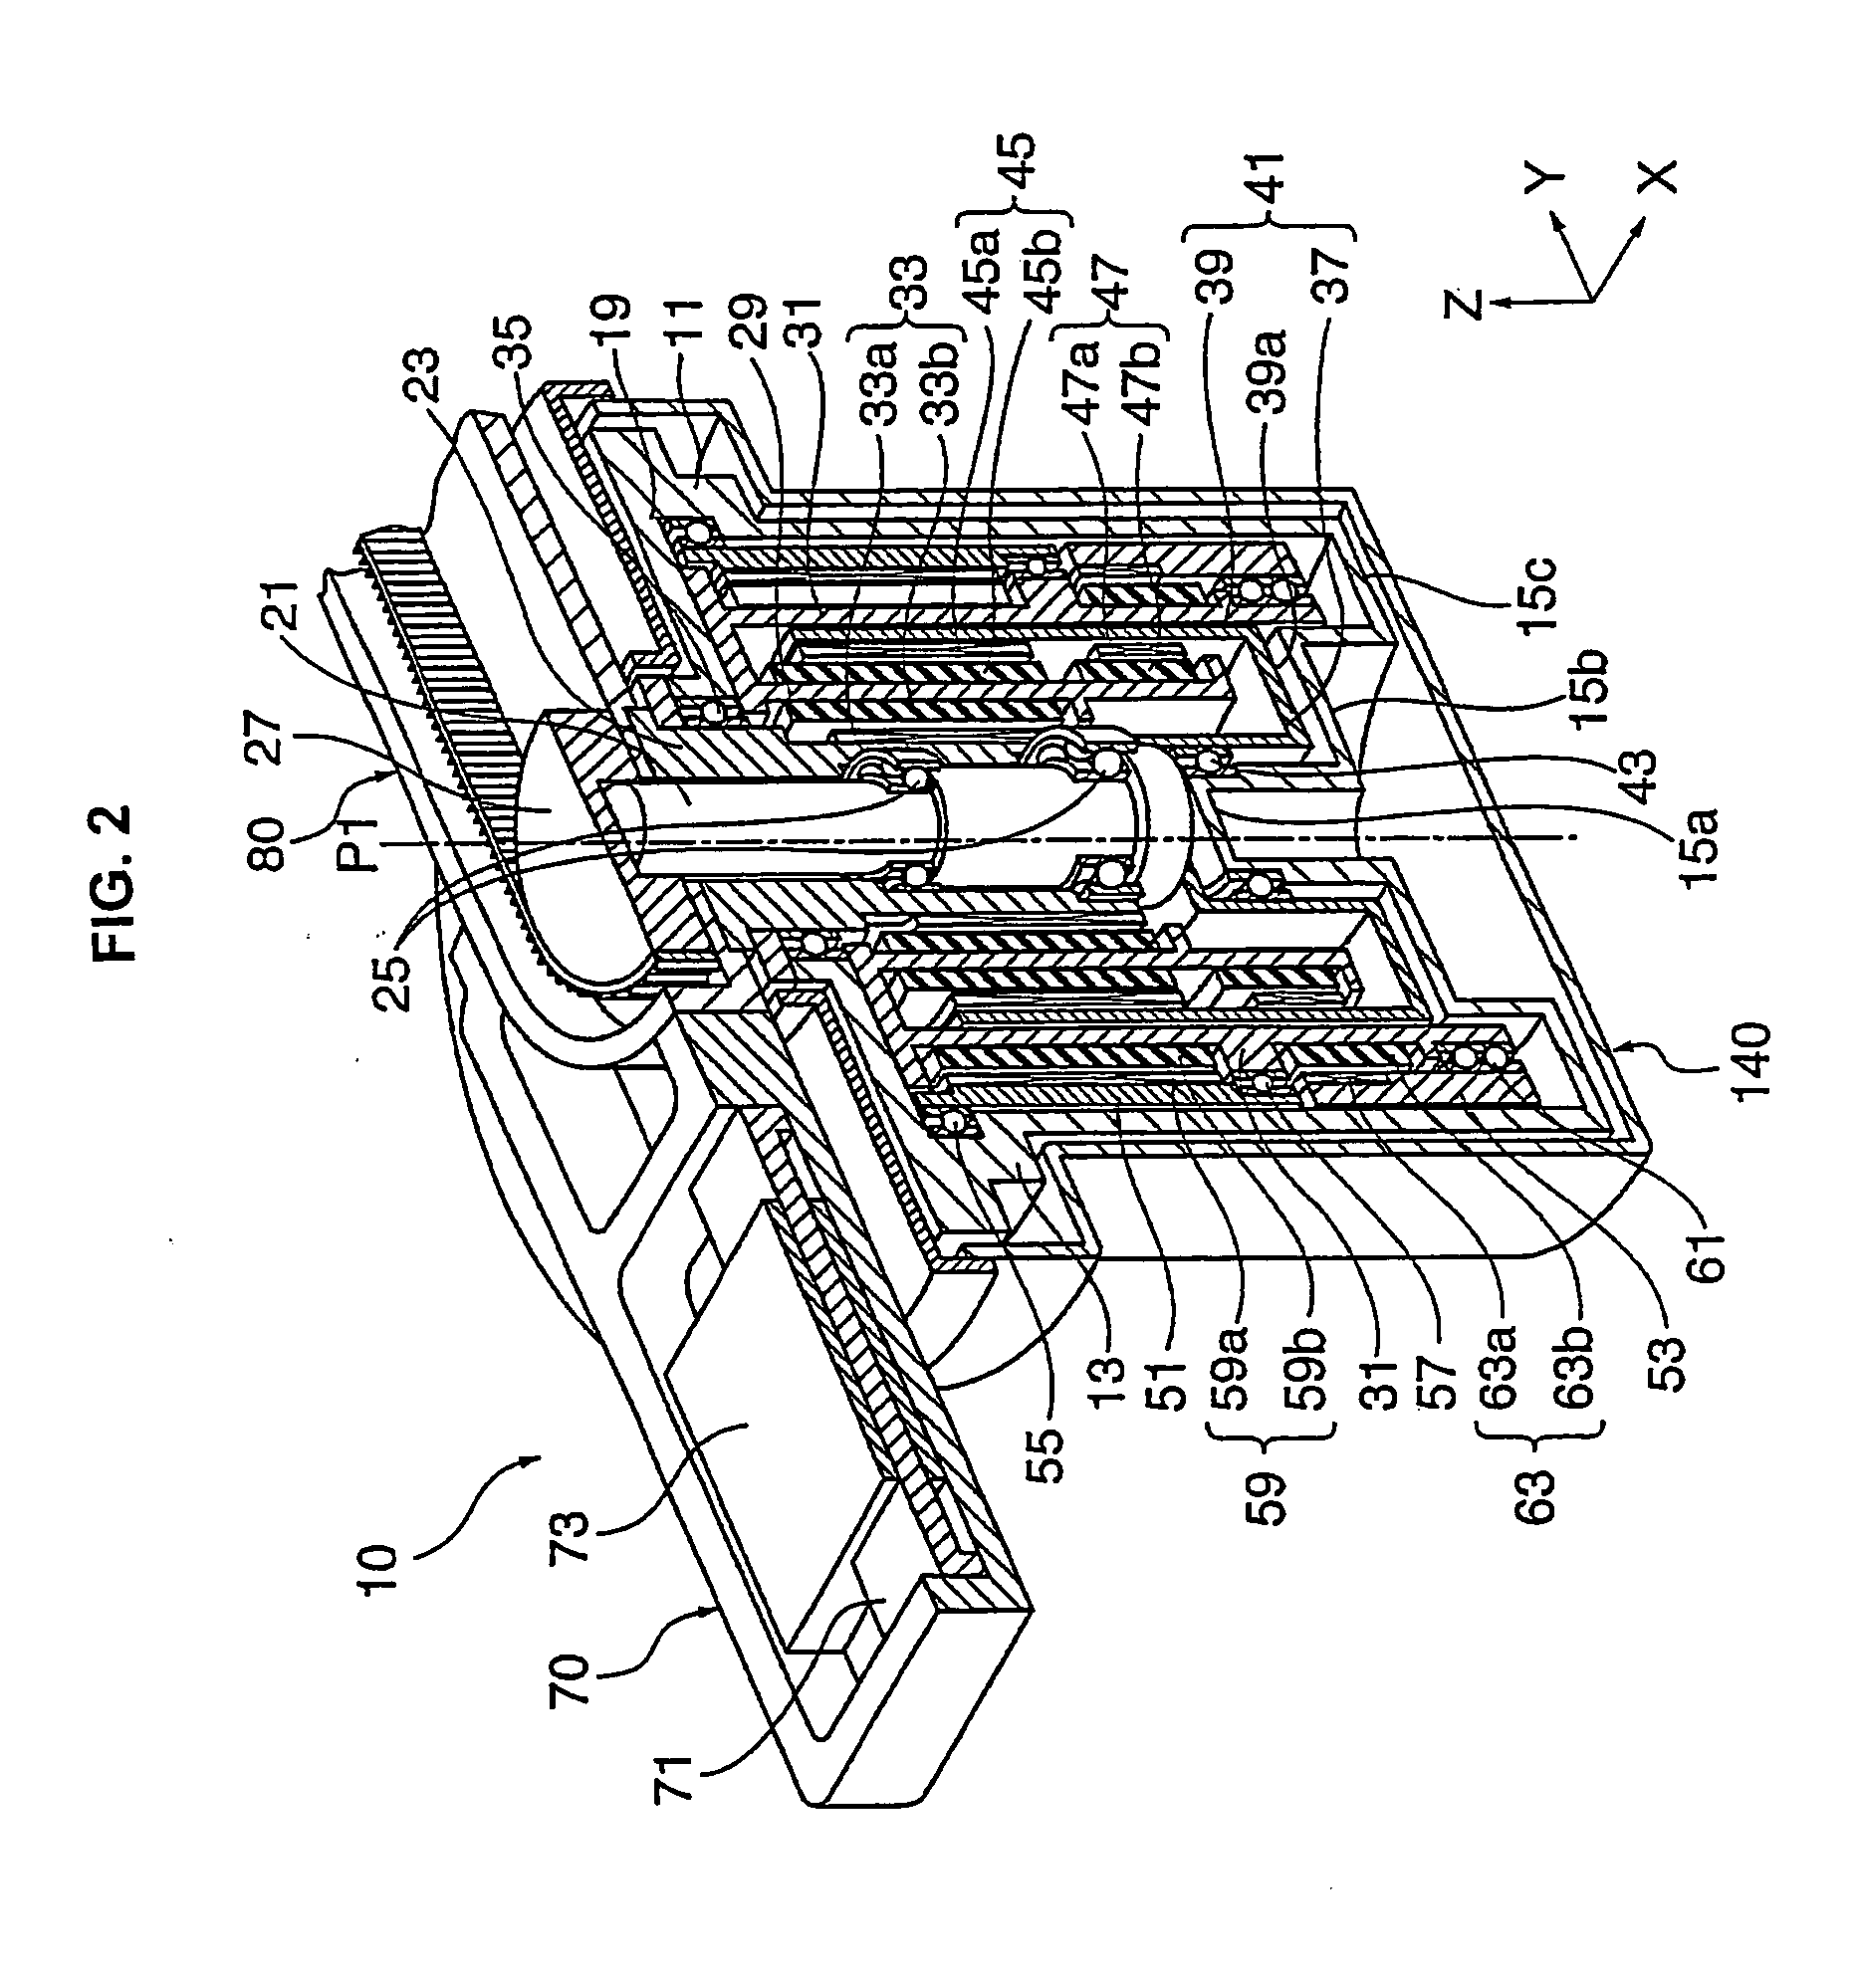 Motor, robot, substrate loader, and exposure apparatus